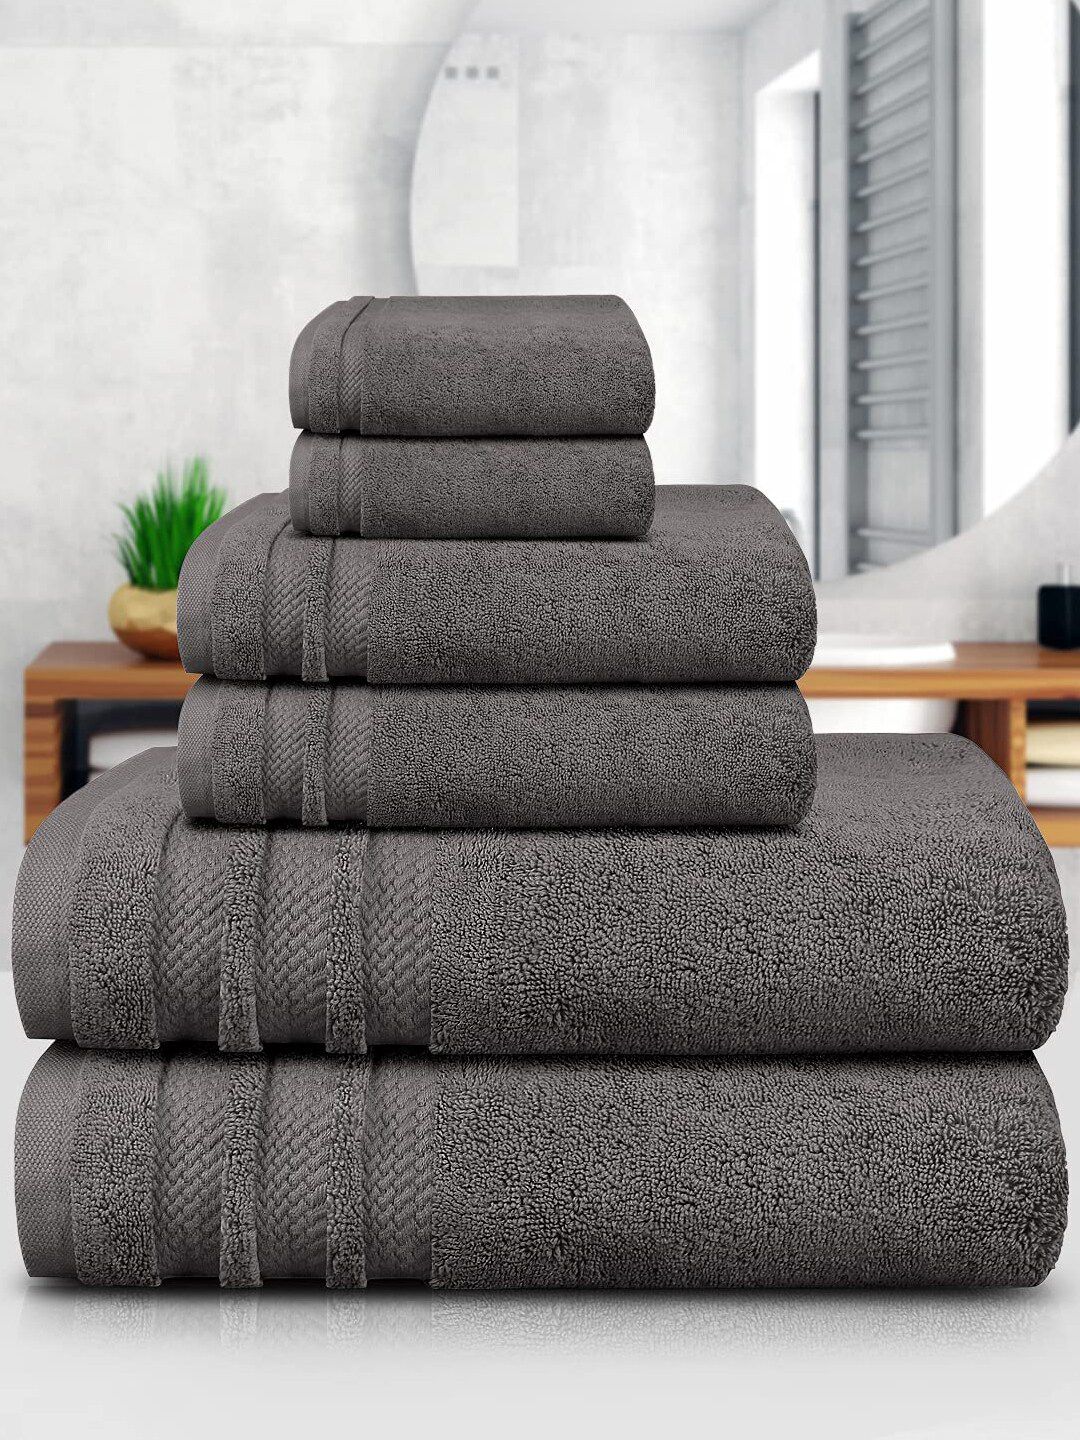 Trident Set Of 6 Charcoal Grey Solid 500 GSM Soft & Plush Pure Cotton Towel Set Price in India